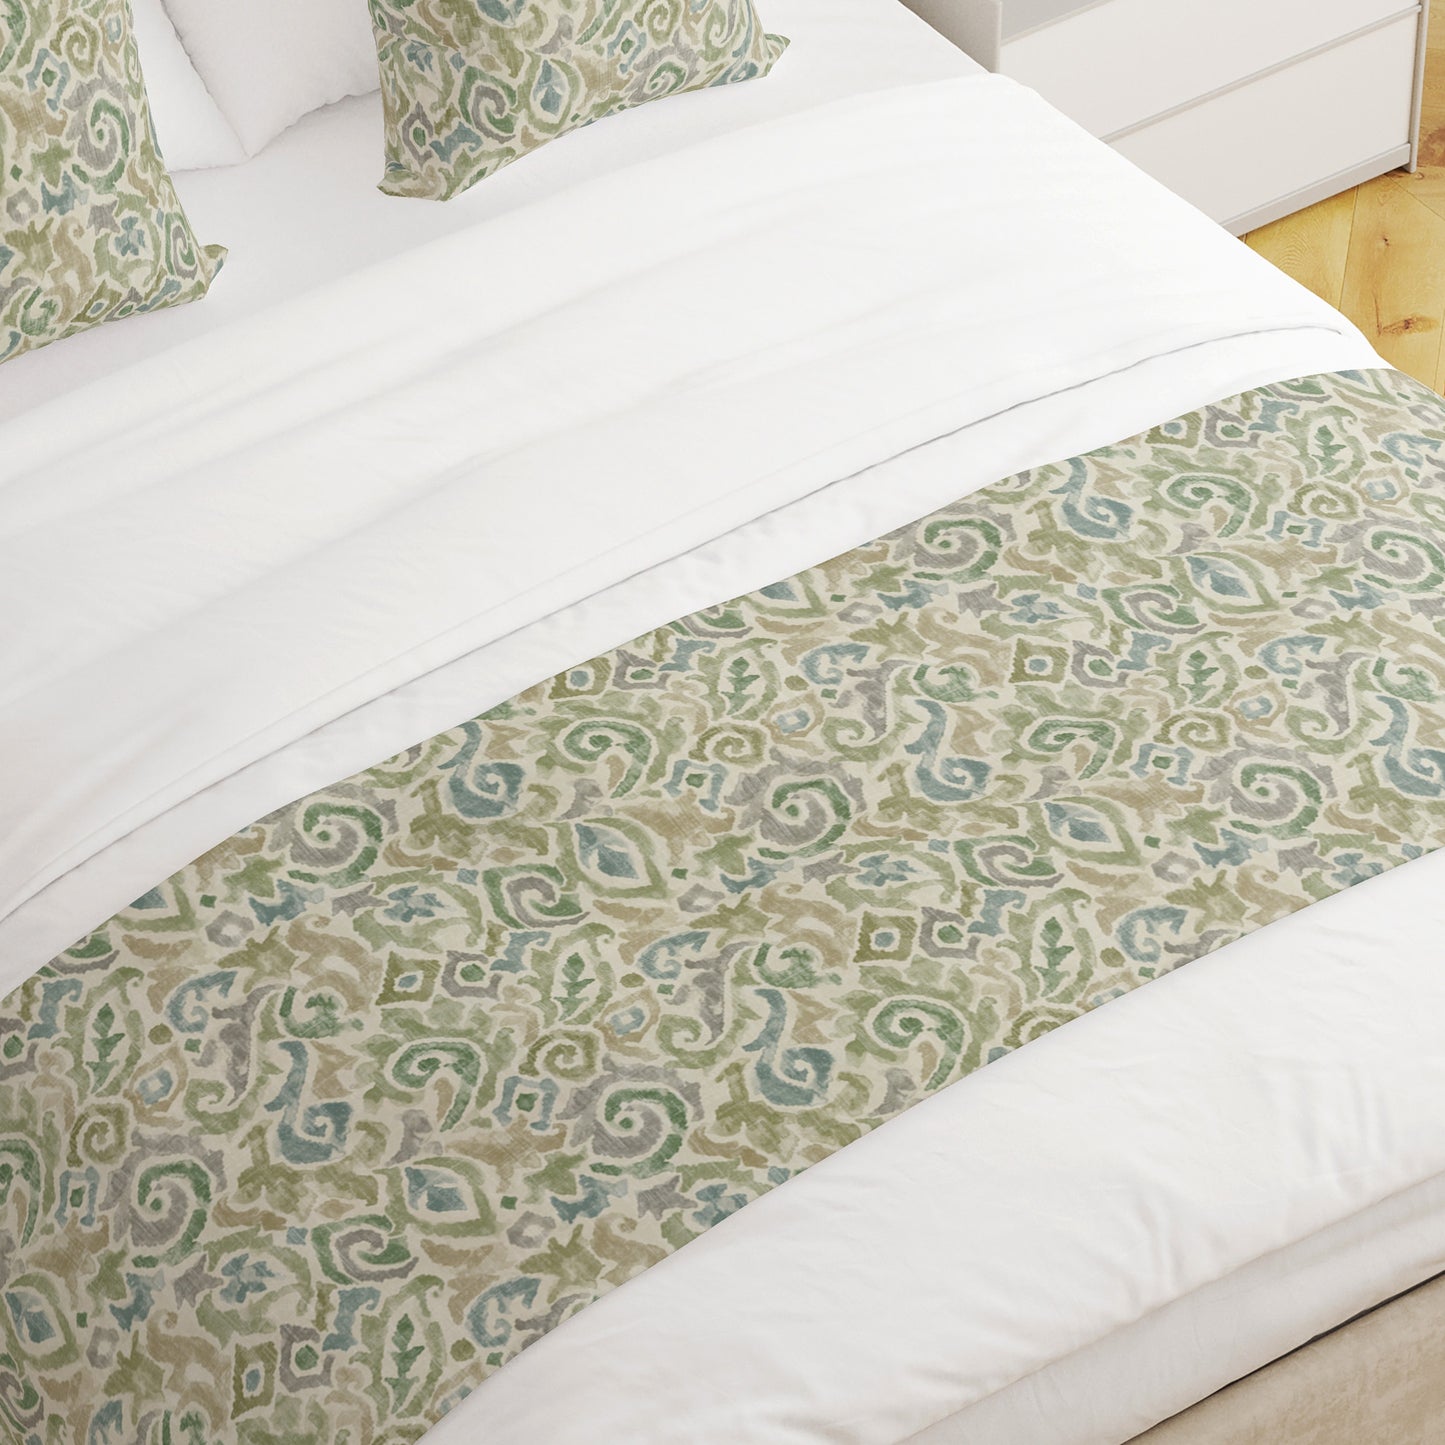 Bed Runner in Jester Bay Green Paisley Watercolor